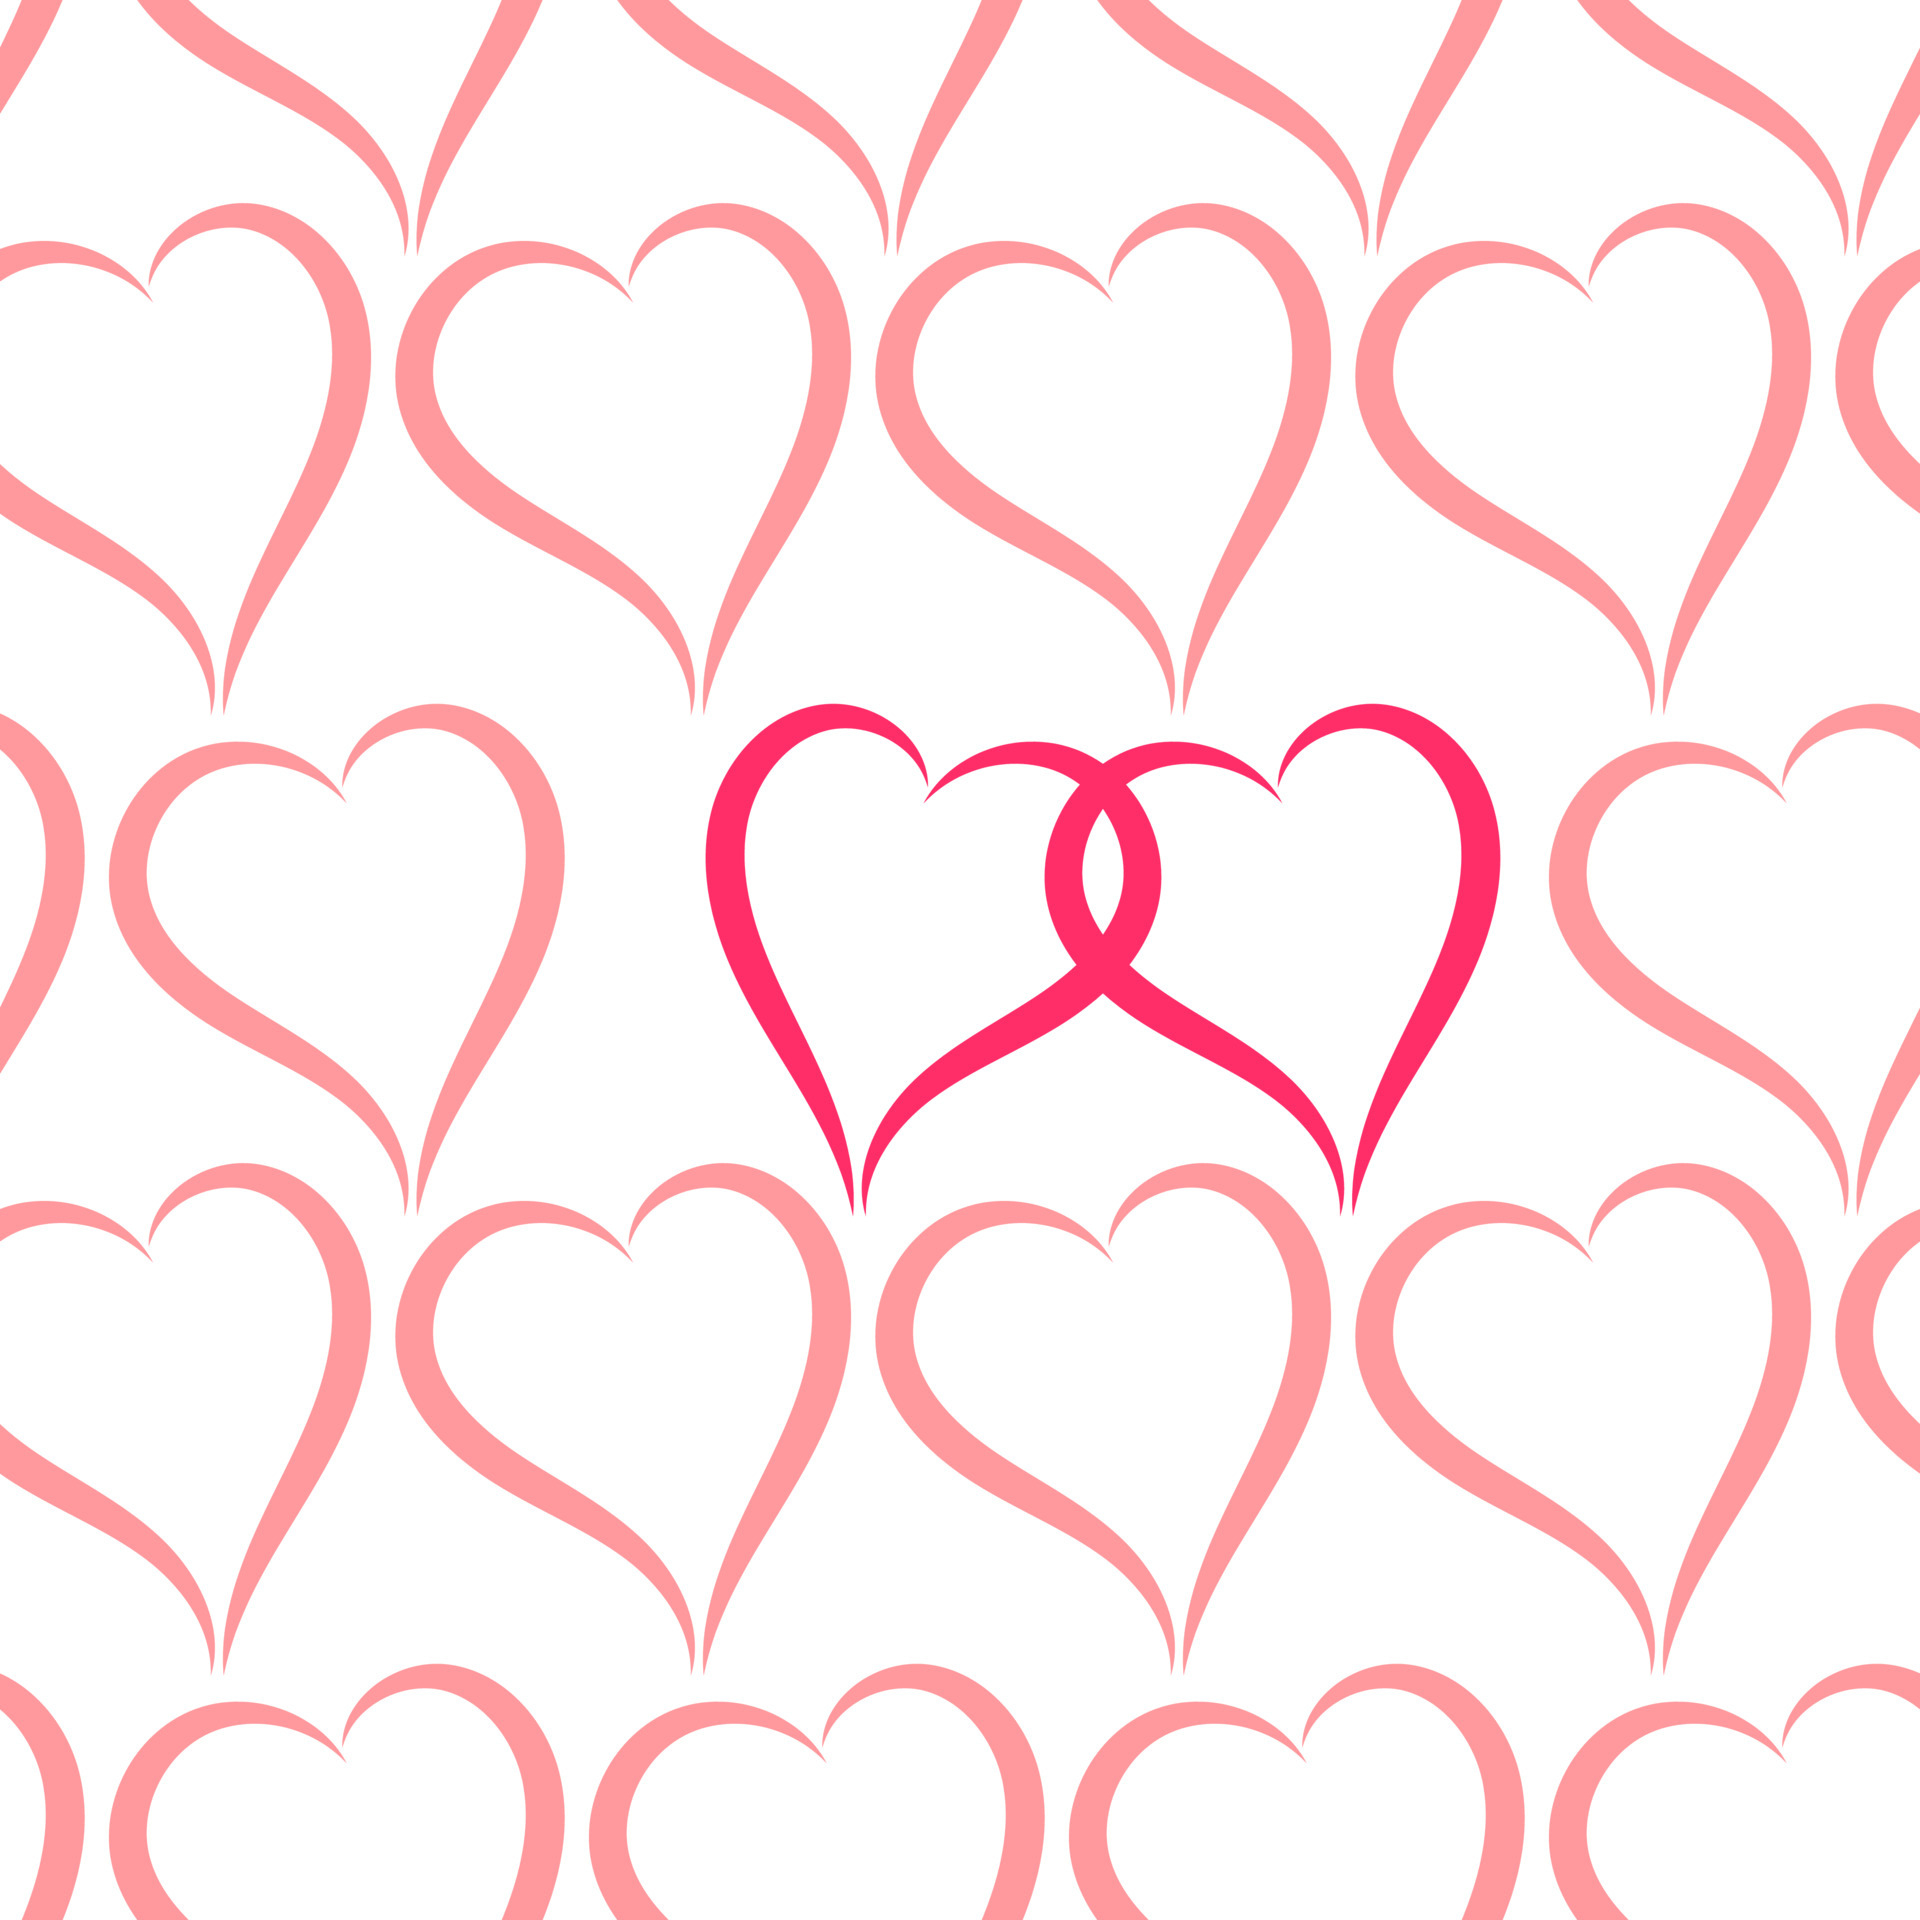 1920x1920 Seamless pattern, pale pink hearts on a white background, two hearts are different from the rest. Design for textiles, wallpaper for St. Valentine's Day 4701016 Vector Art